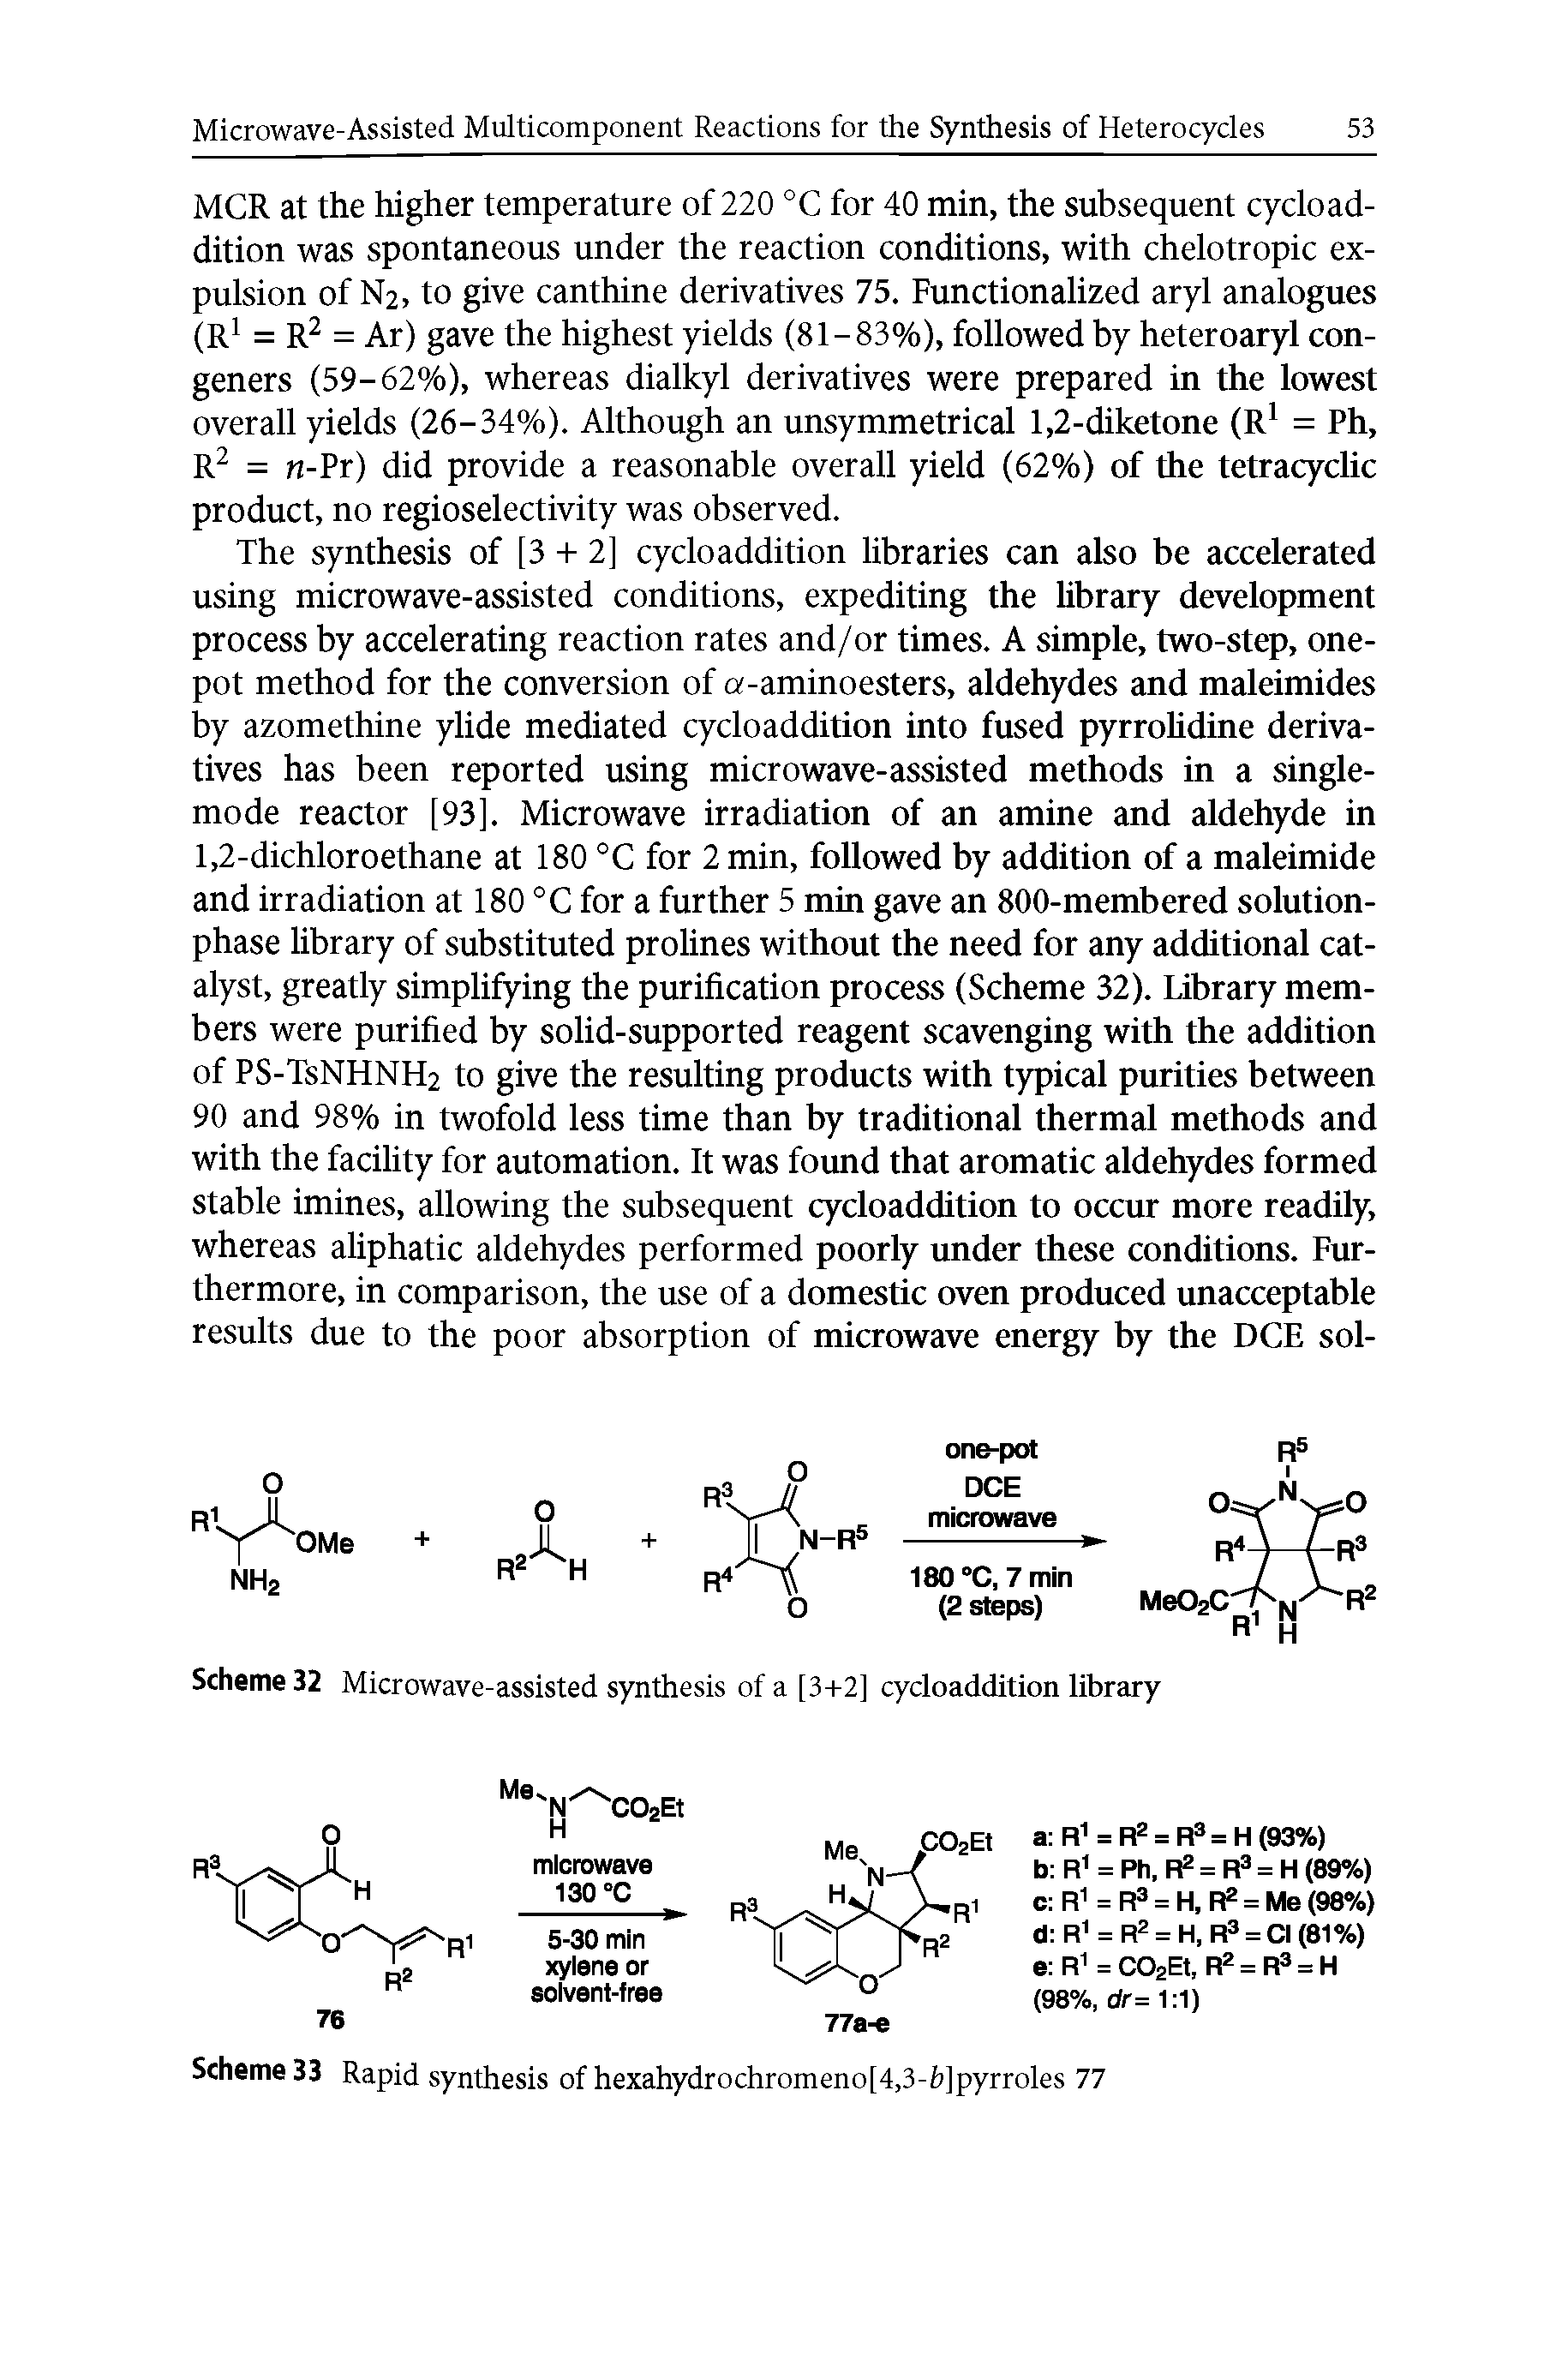 Scheme 32 Microwave-assisted synthesis of a [3-1-2] cycloaddition library...